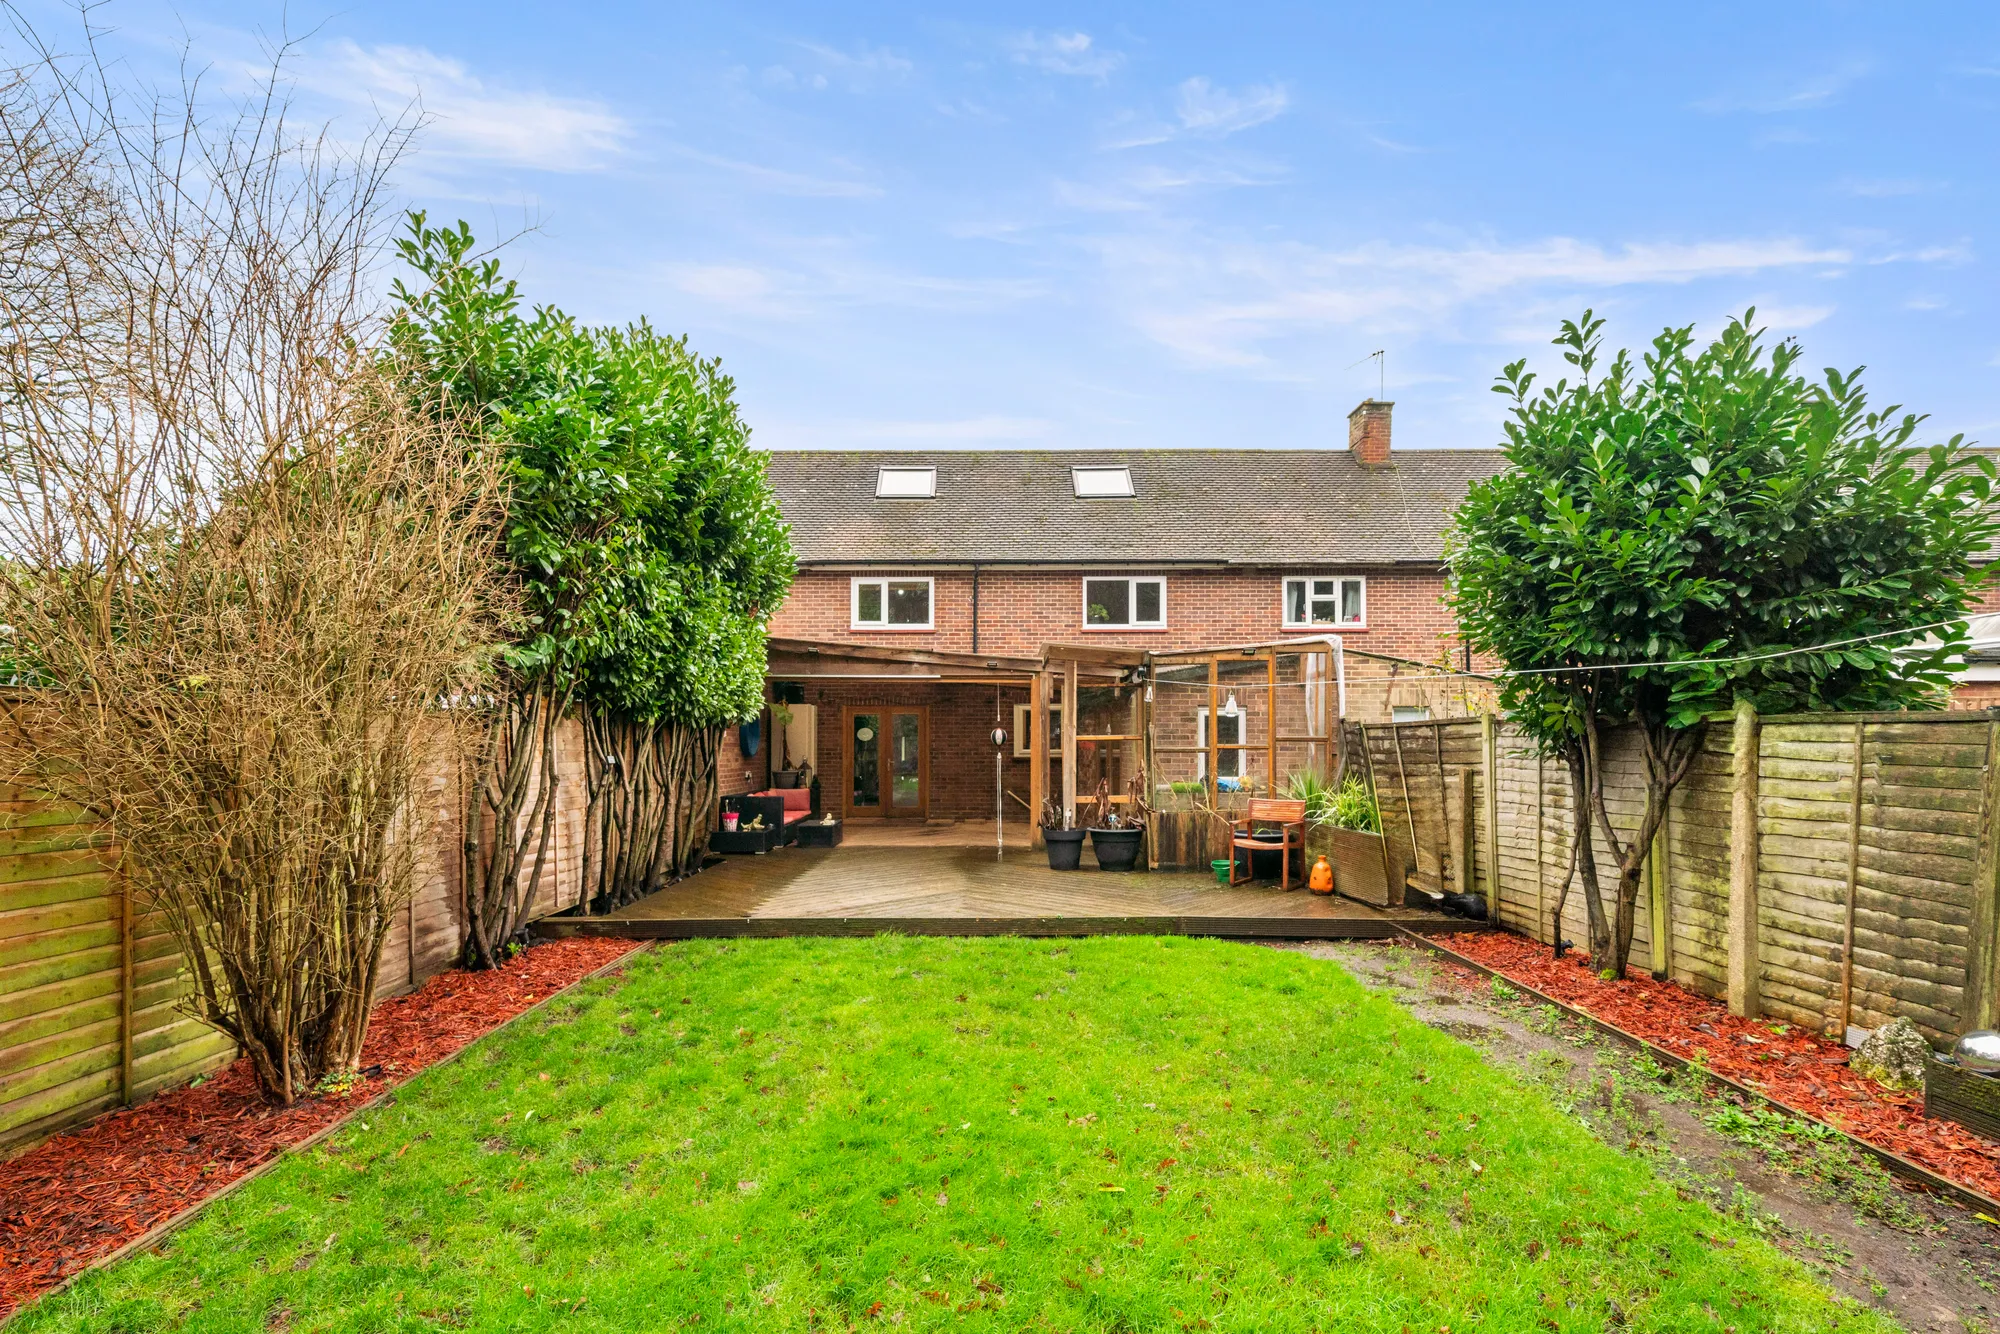 3 bed mid-terraced house for sale in Carroll Crescent, Ascot 0